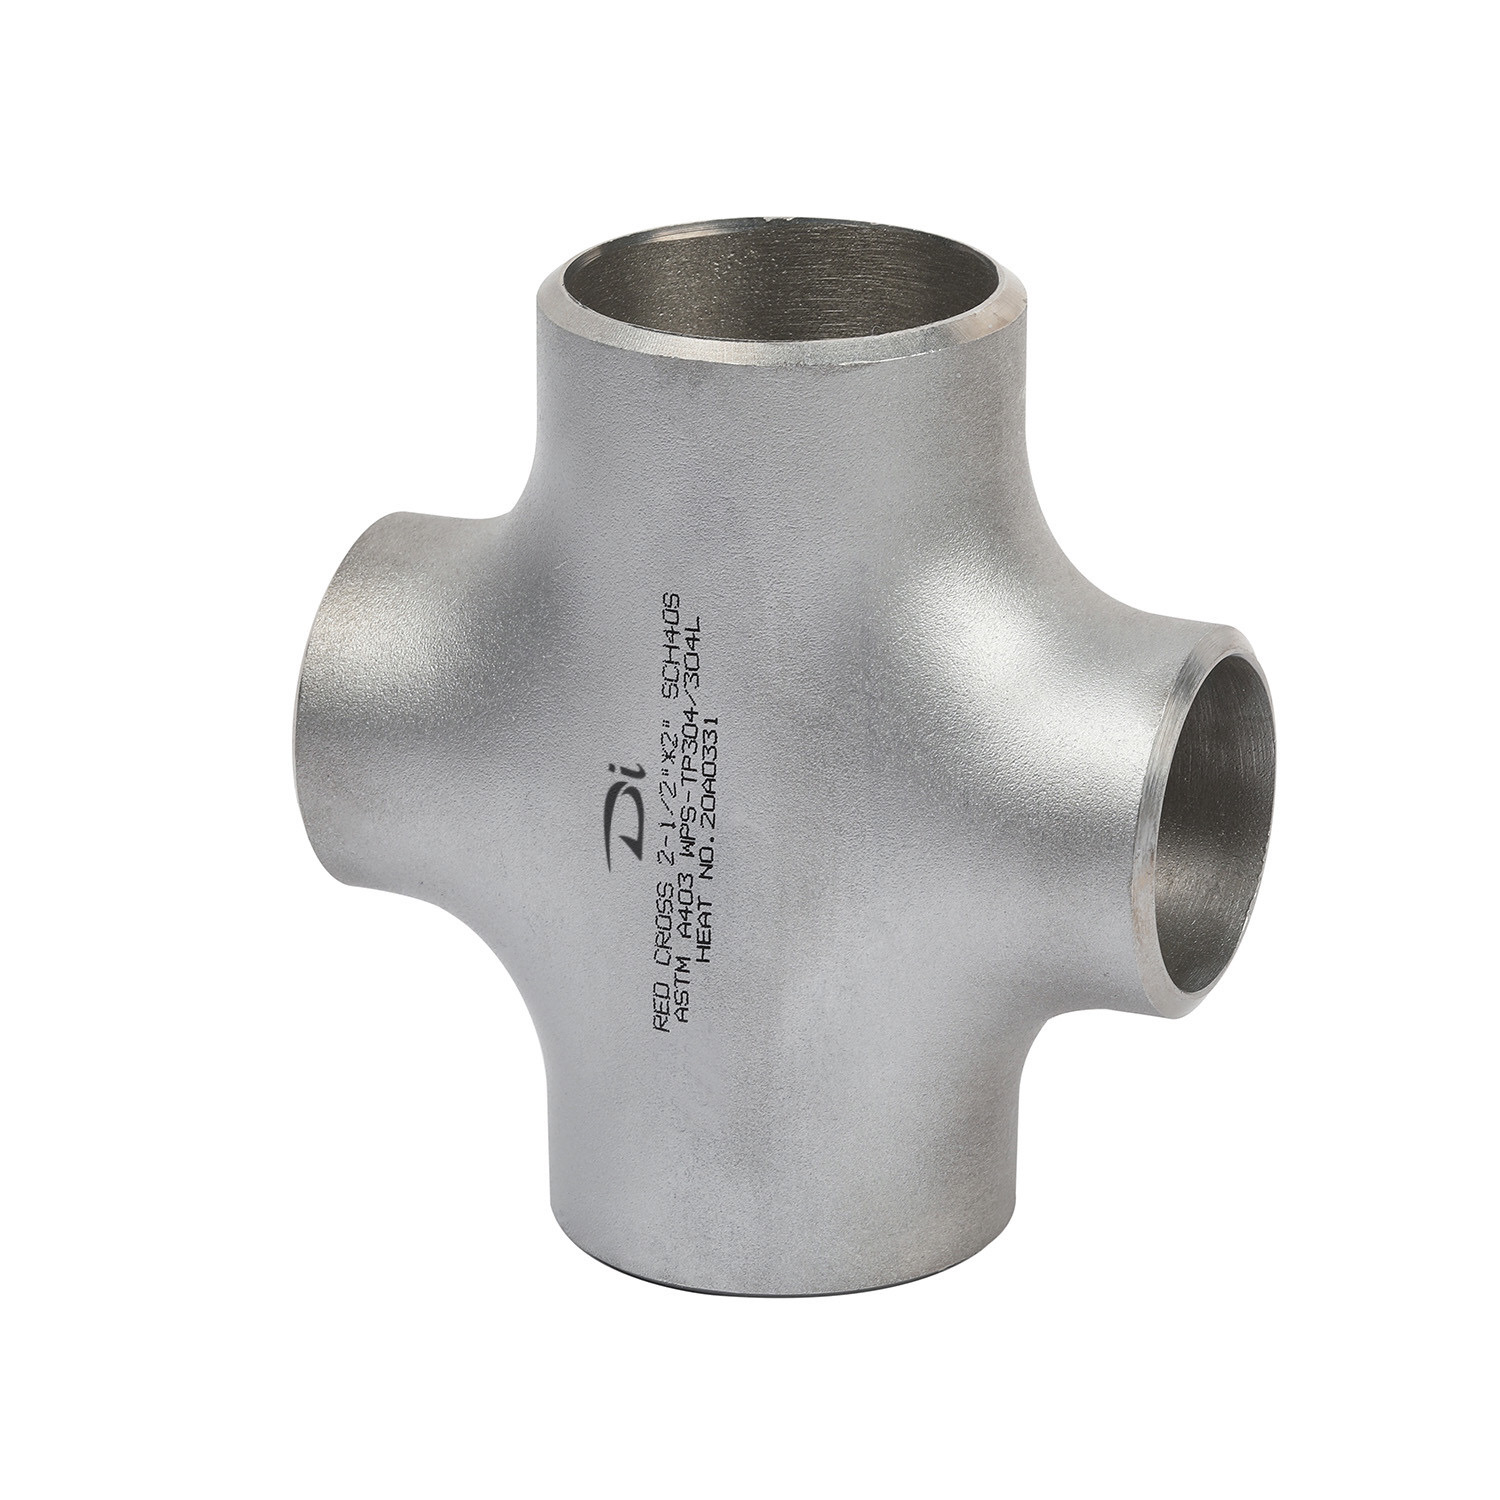 Cross Fittings Manufacturer in India